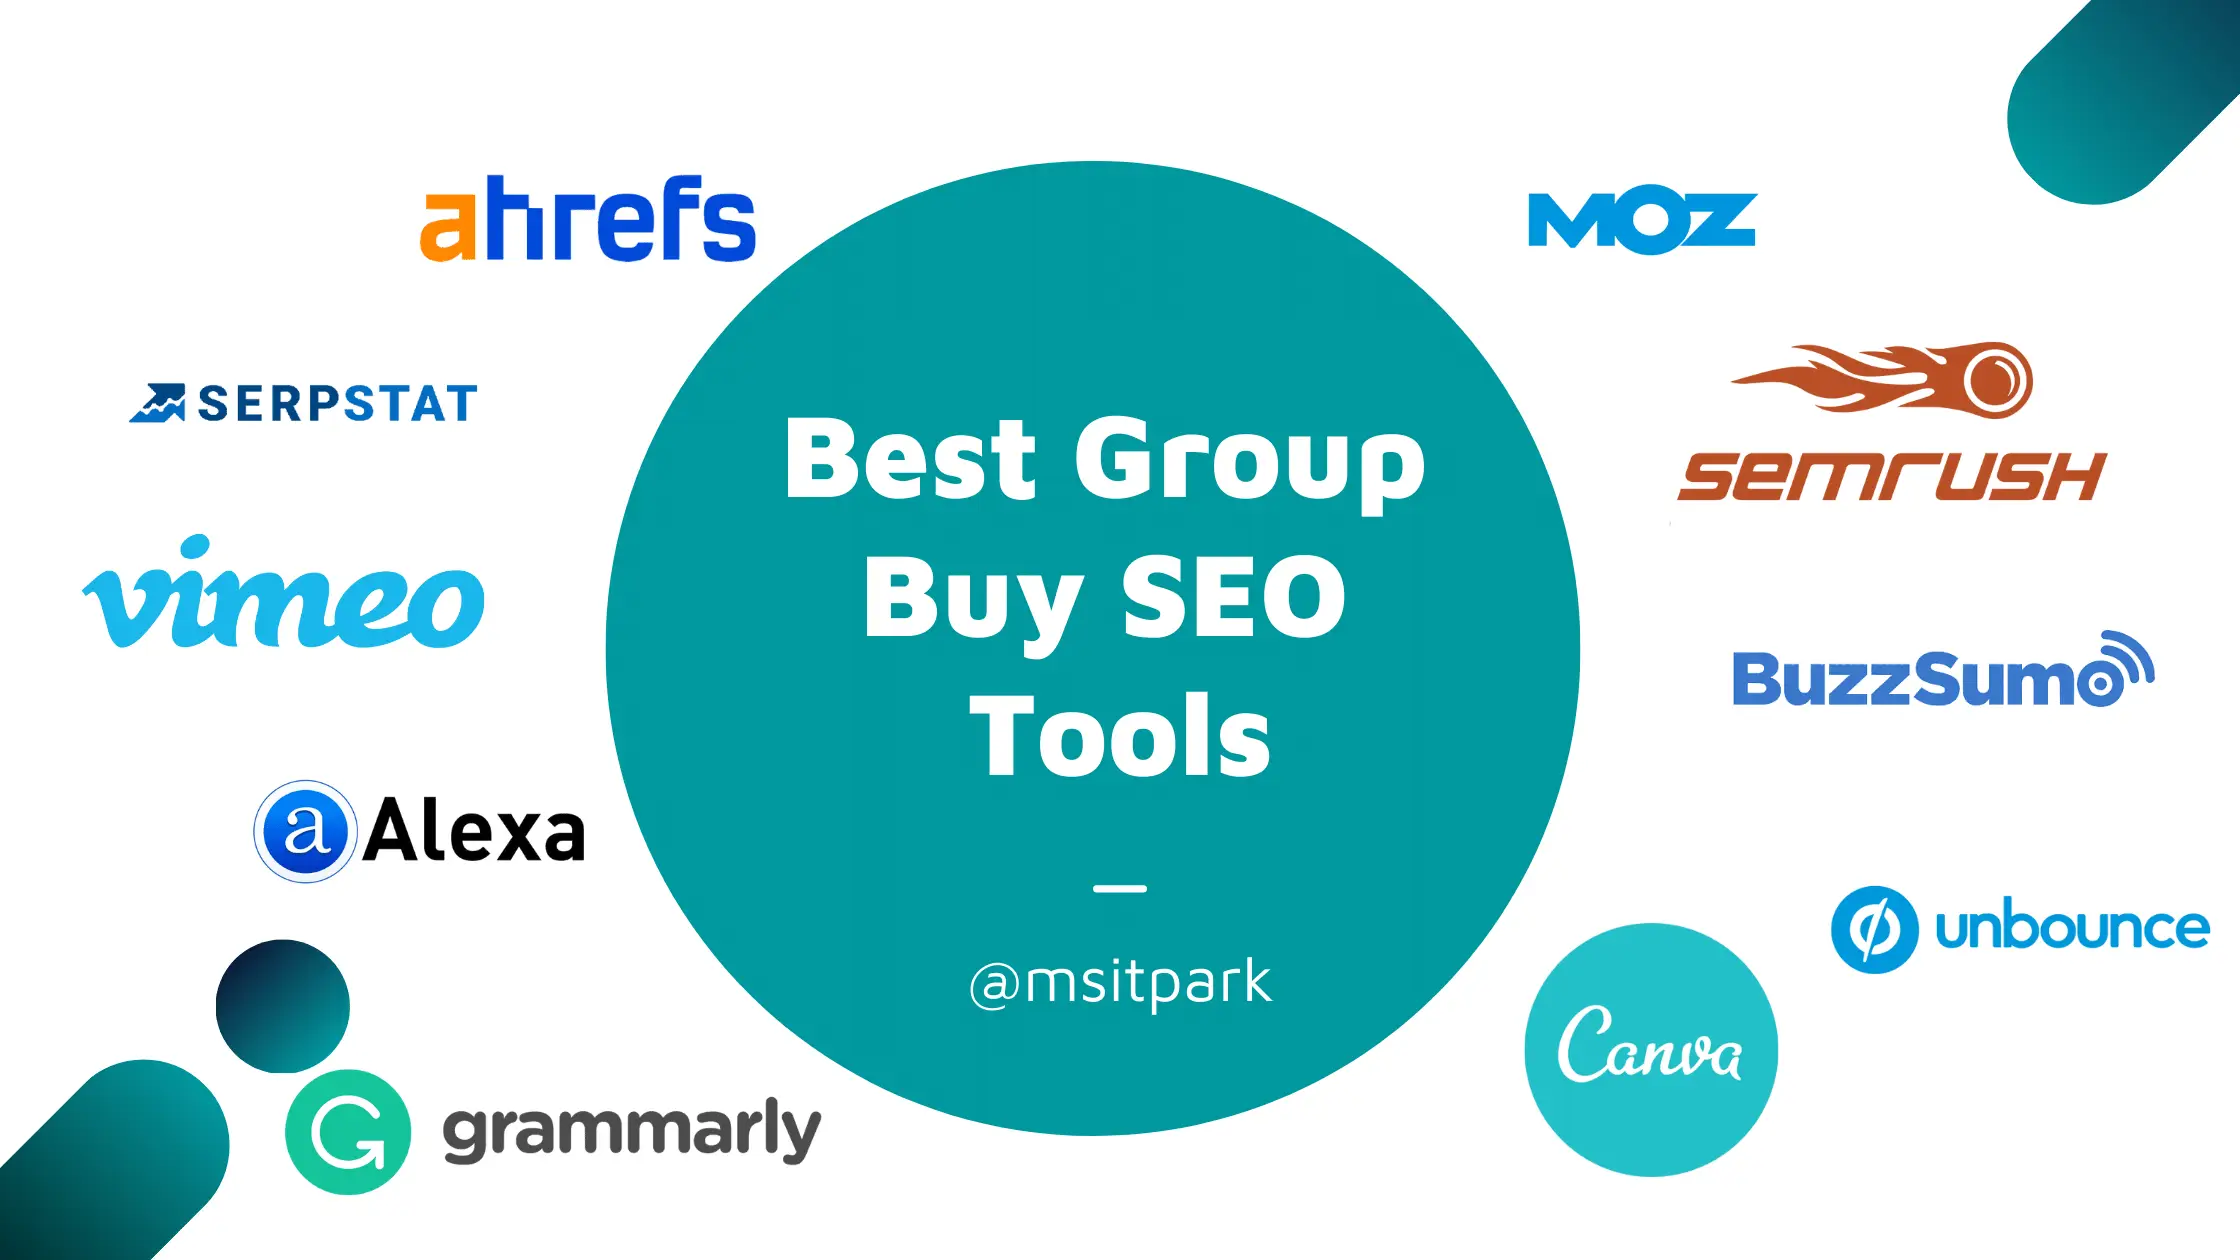 Let's take a look at the best group buy SEO tools.